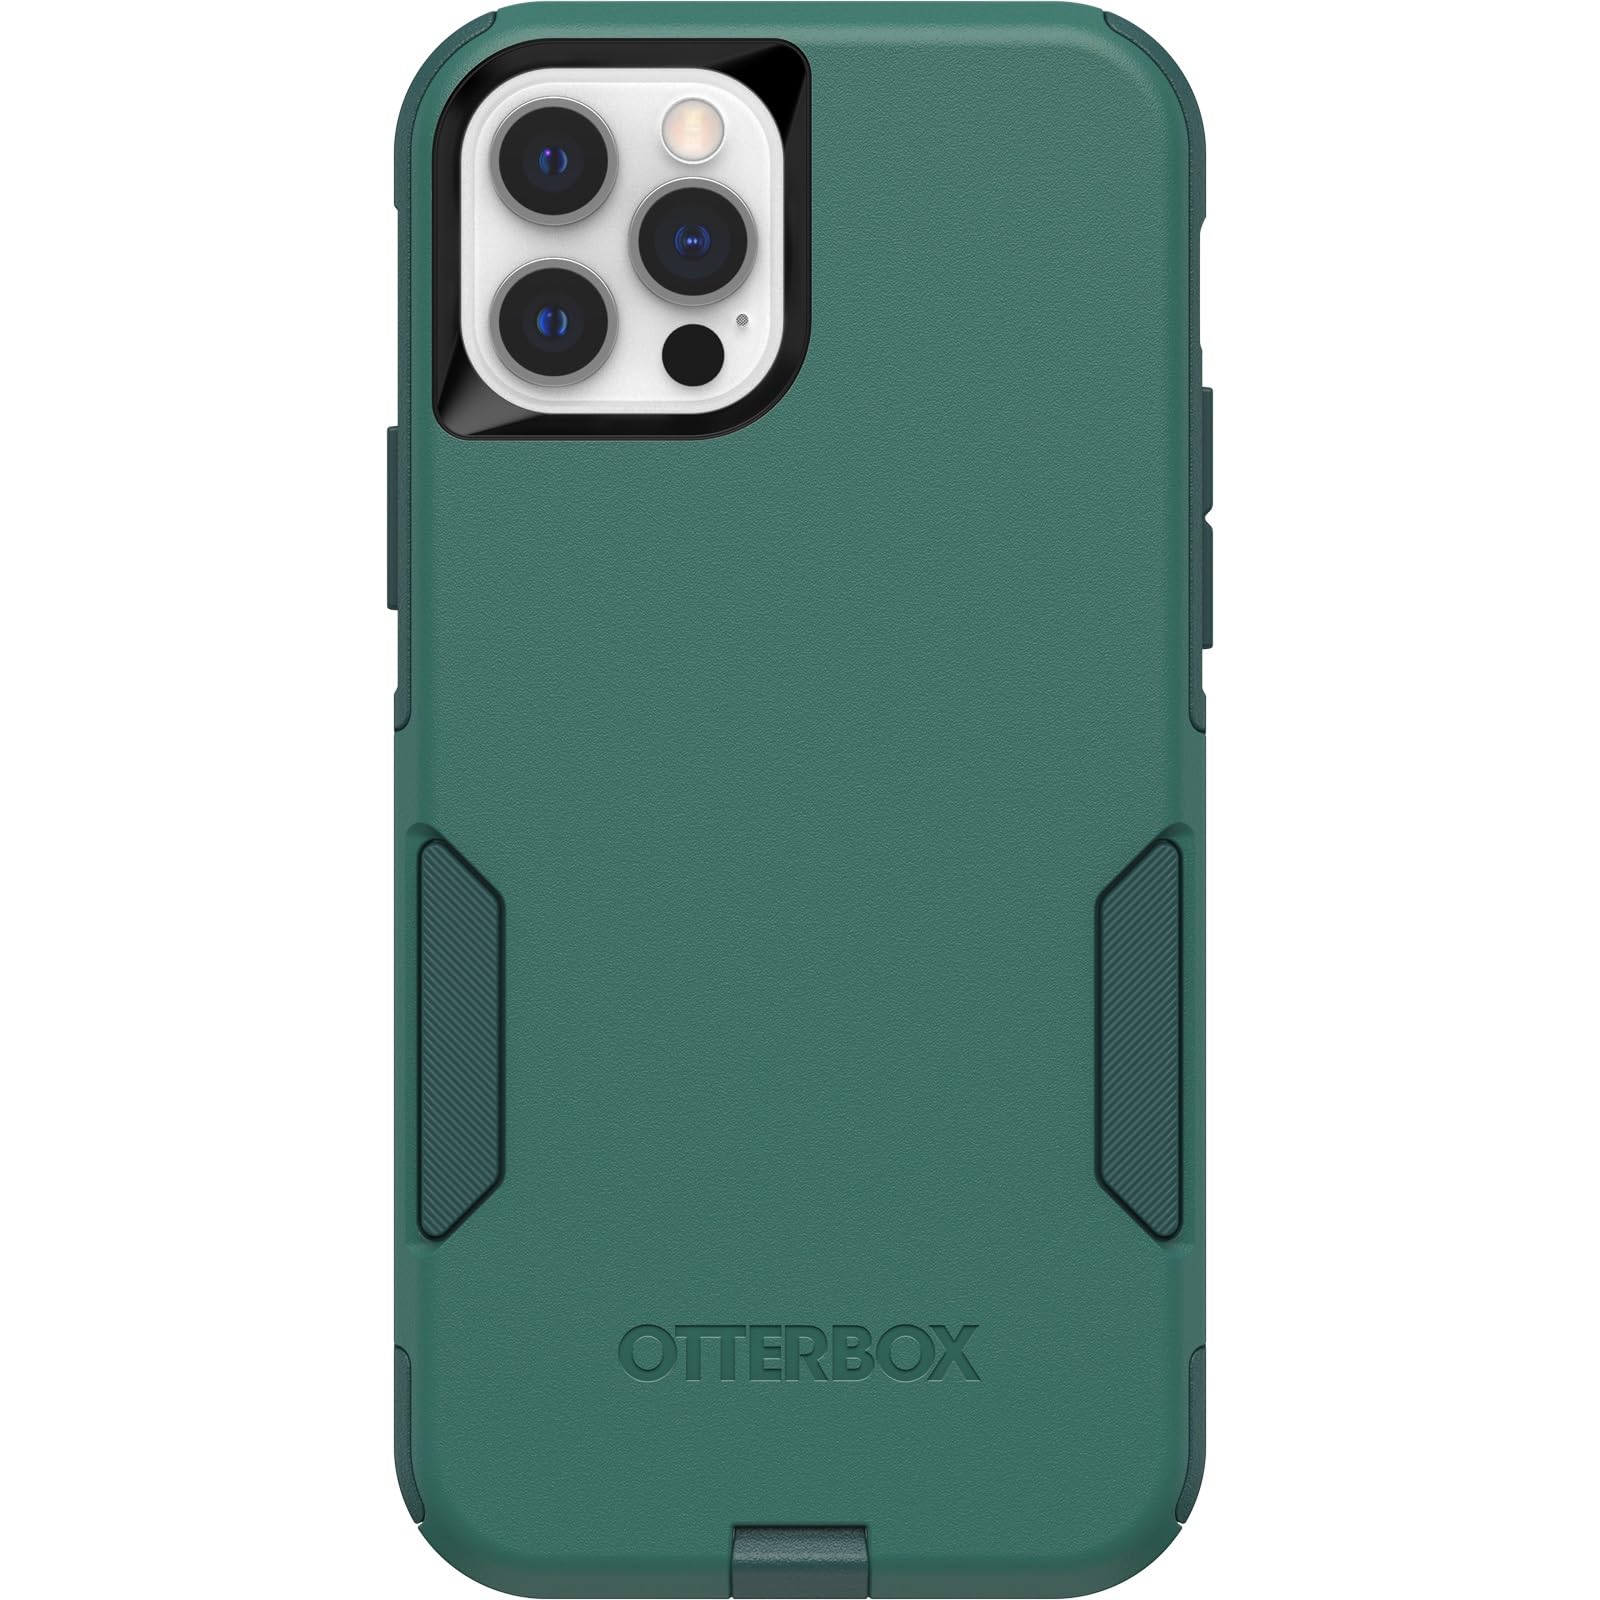 OtterBox iPhone 12 & iPhone 12 Pro (Only) - Commuter Series Case - Get Your Greens - Slim & Tough - Pocket-Friendly - with Port Protection - Non-Retail Packaging